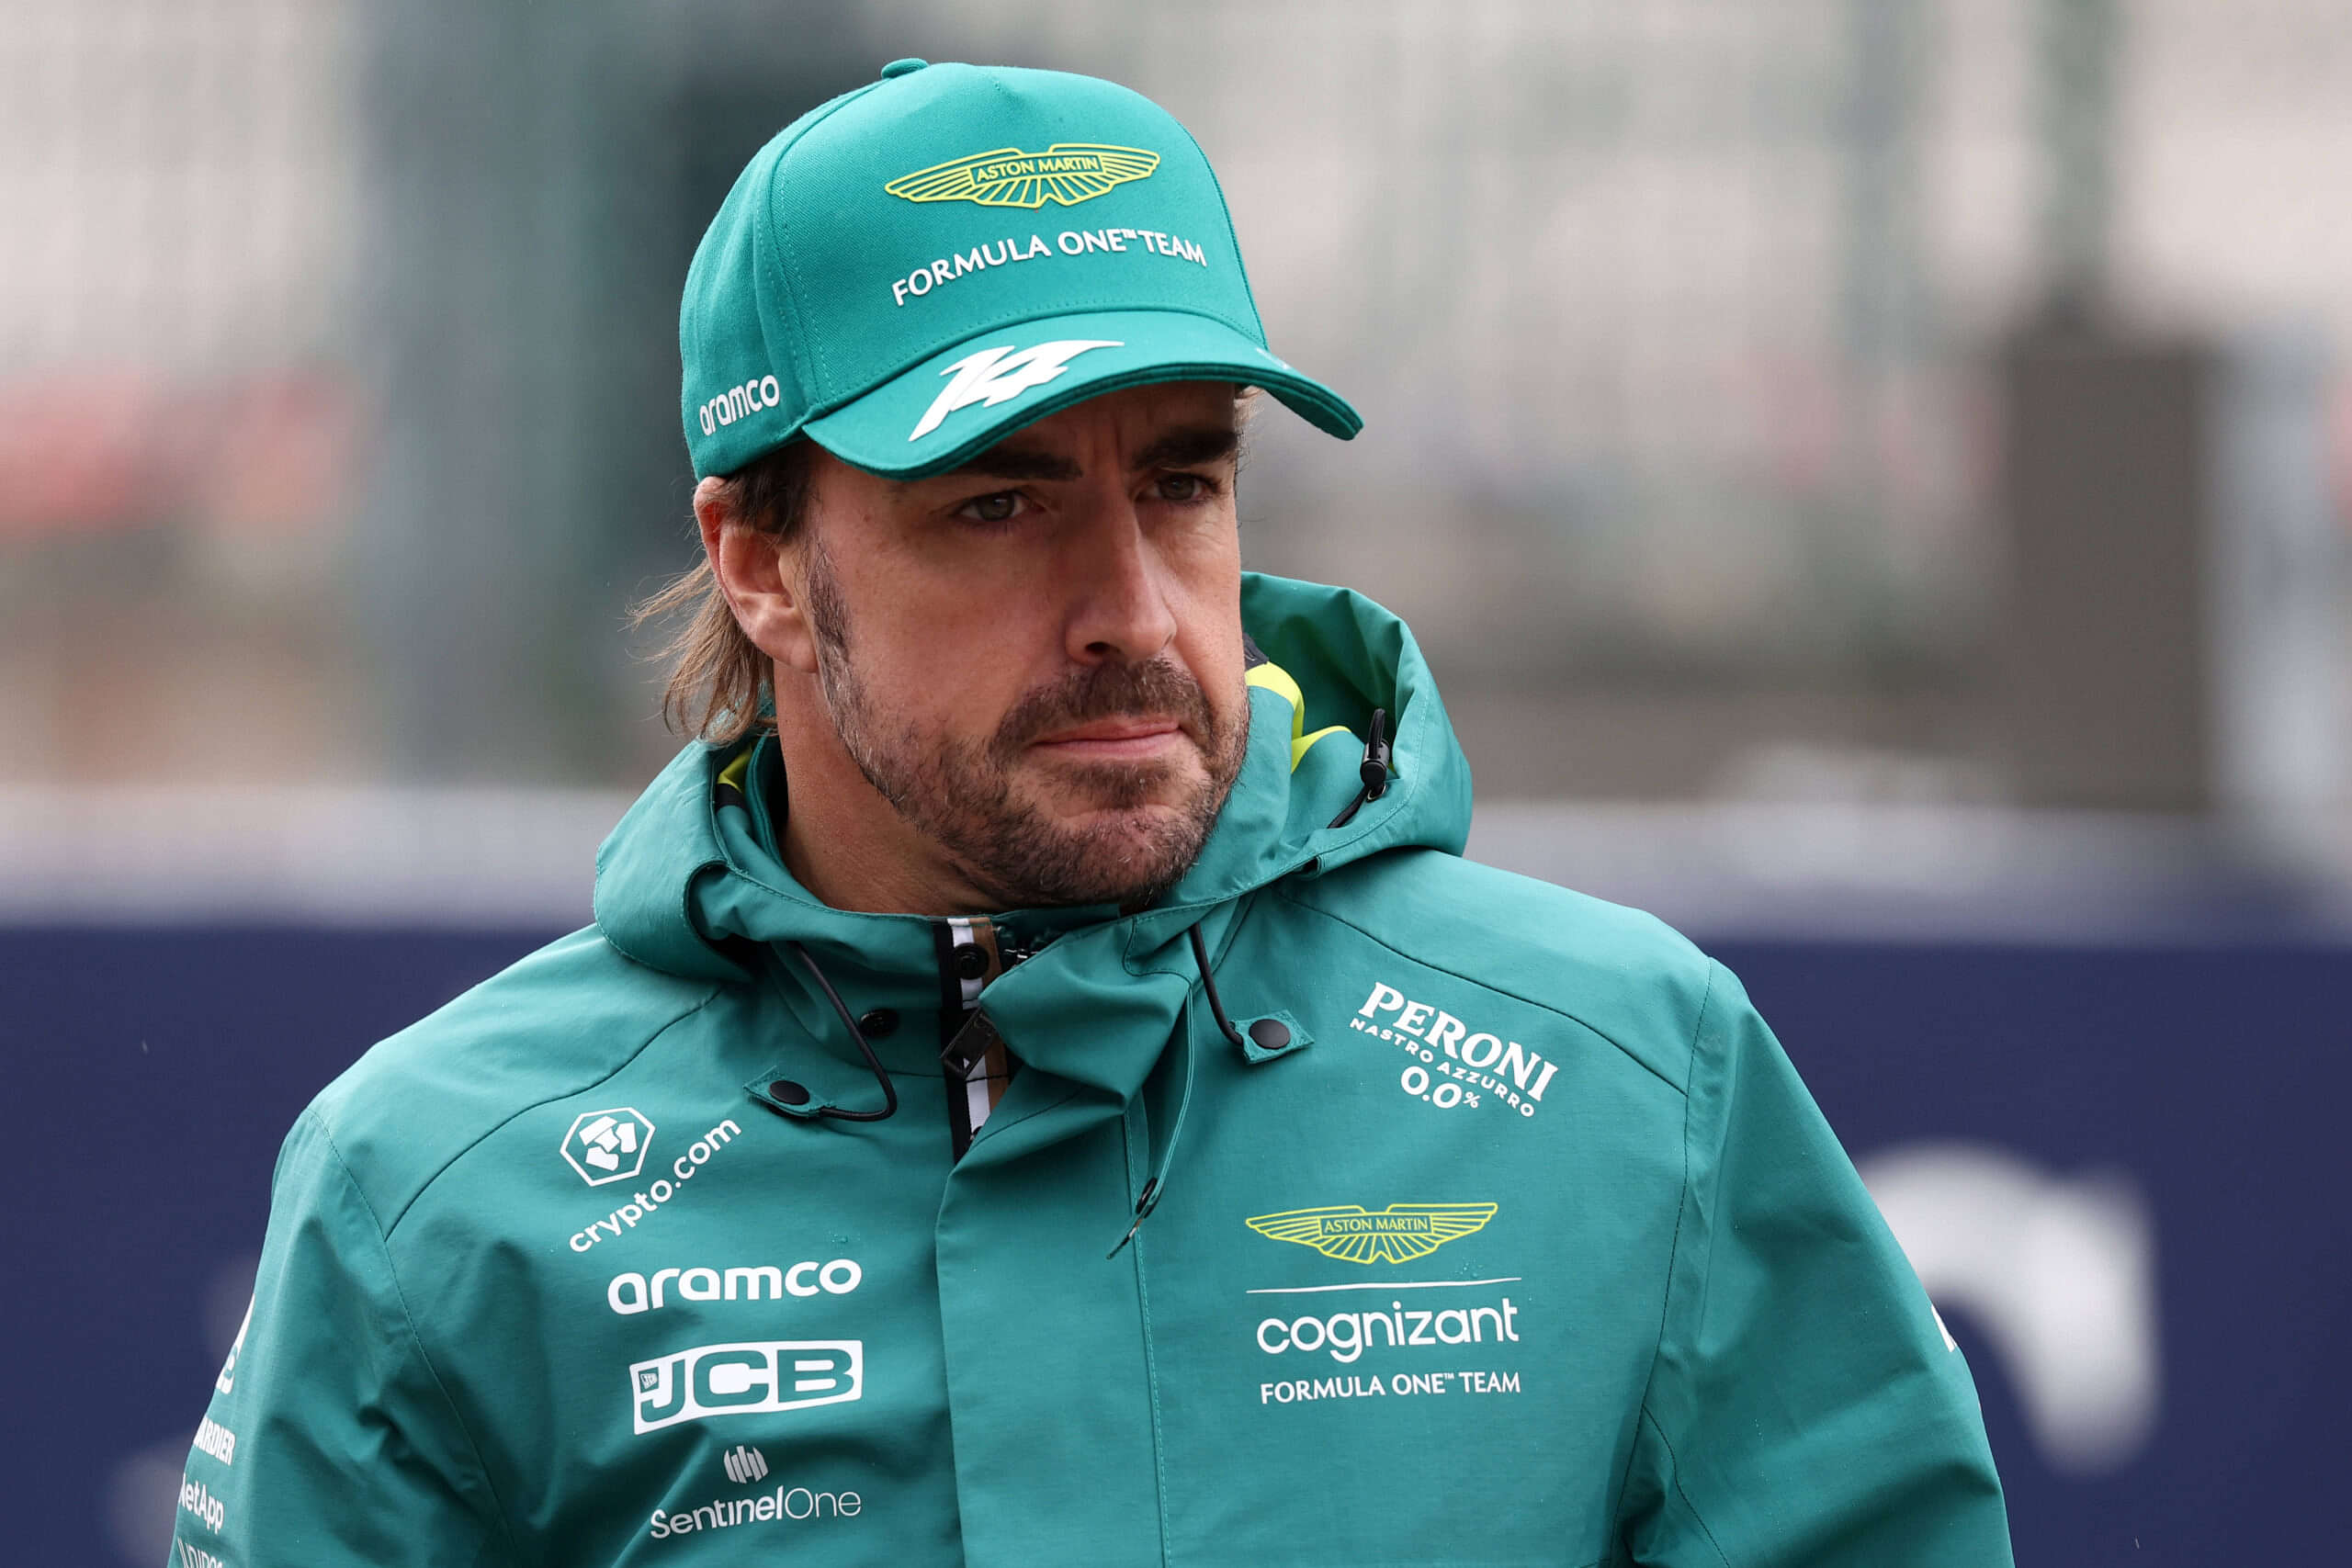 Aston knows high 'calibre' Alonso could make life difficult